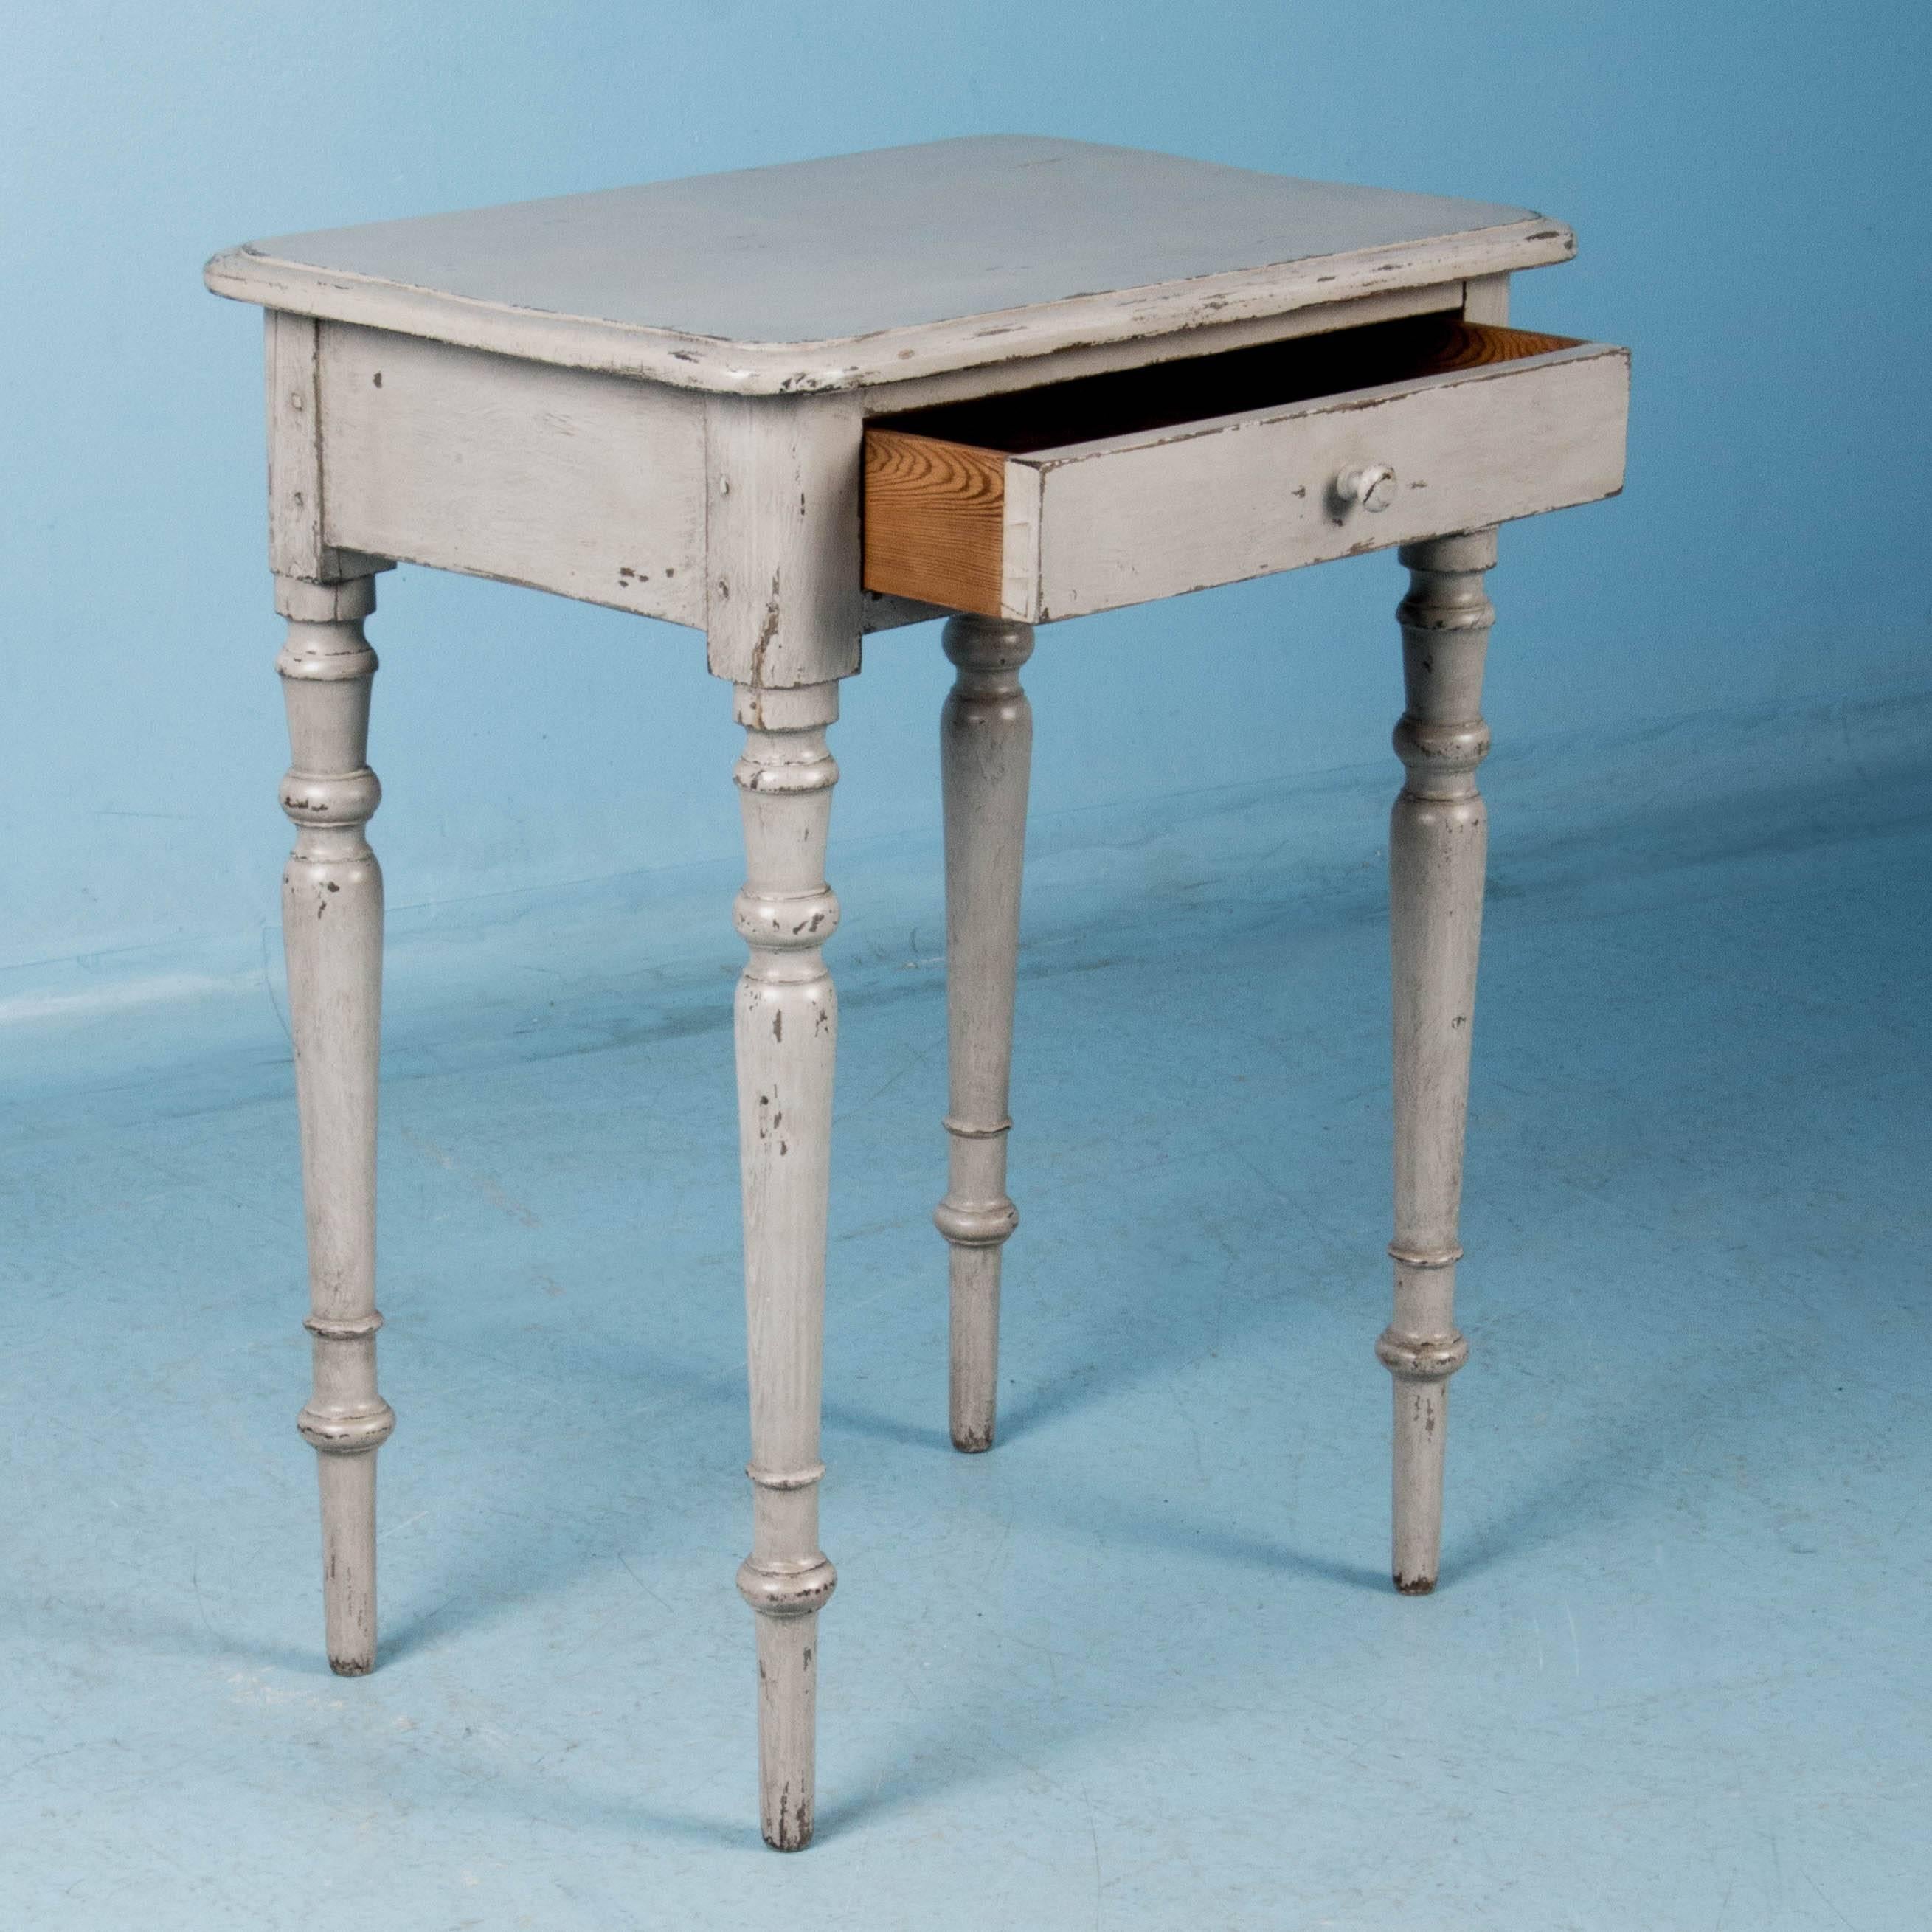 This vintage side table from Denmark is simple and charming with it's softly rounded edges and slightly tapered turned legs. There is a gentle appeal in the gray chalk paint that has been lightly scraped exposing the natural pine beneath, giving